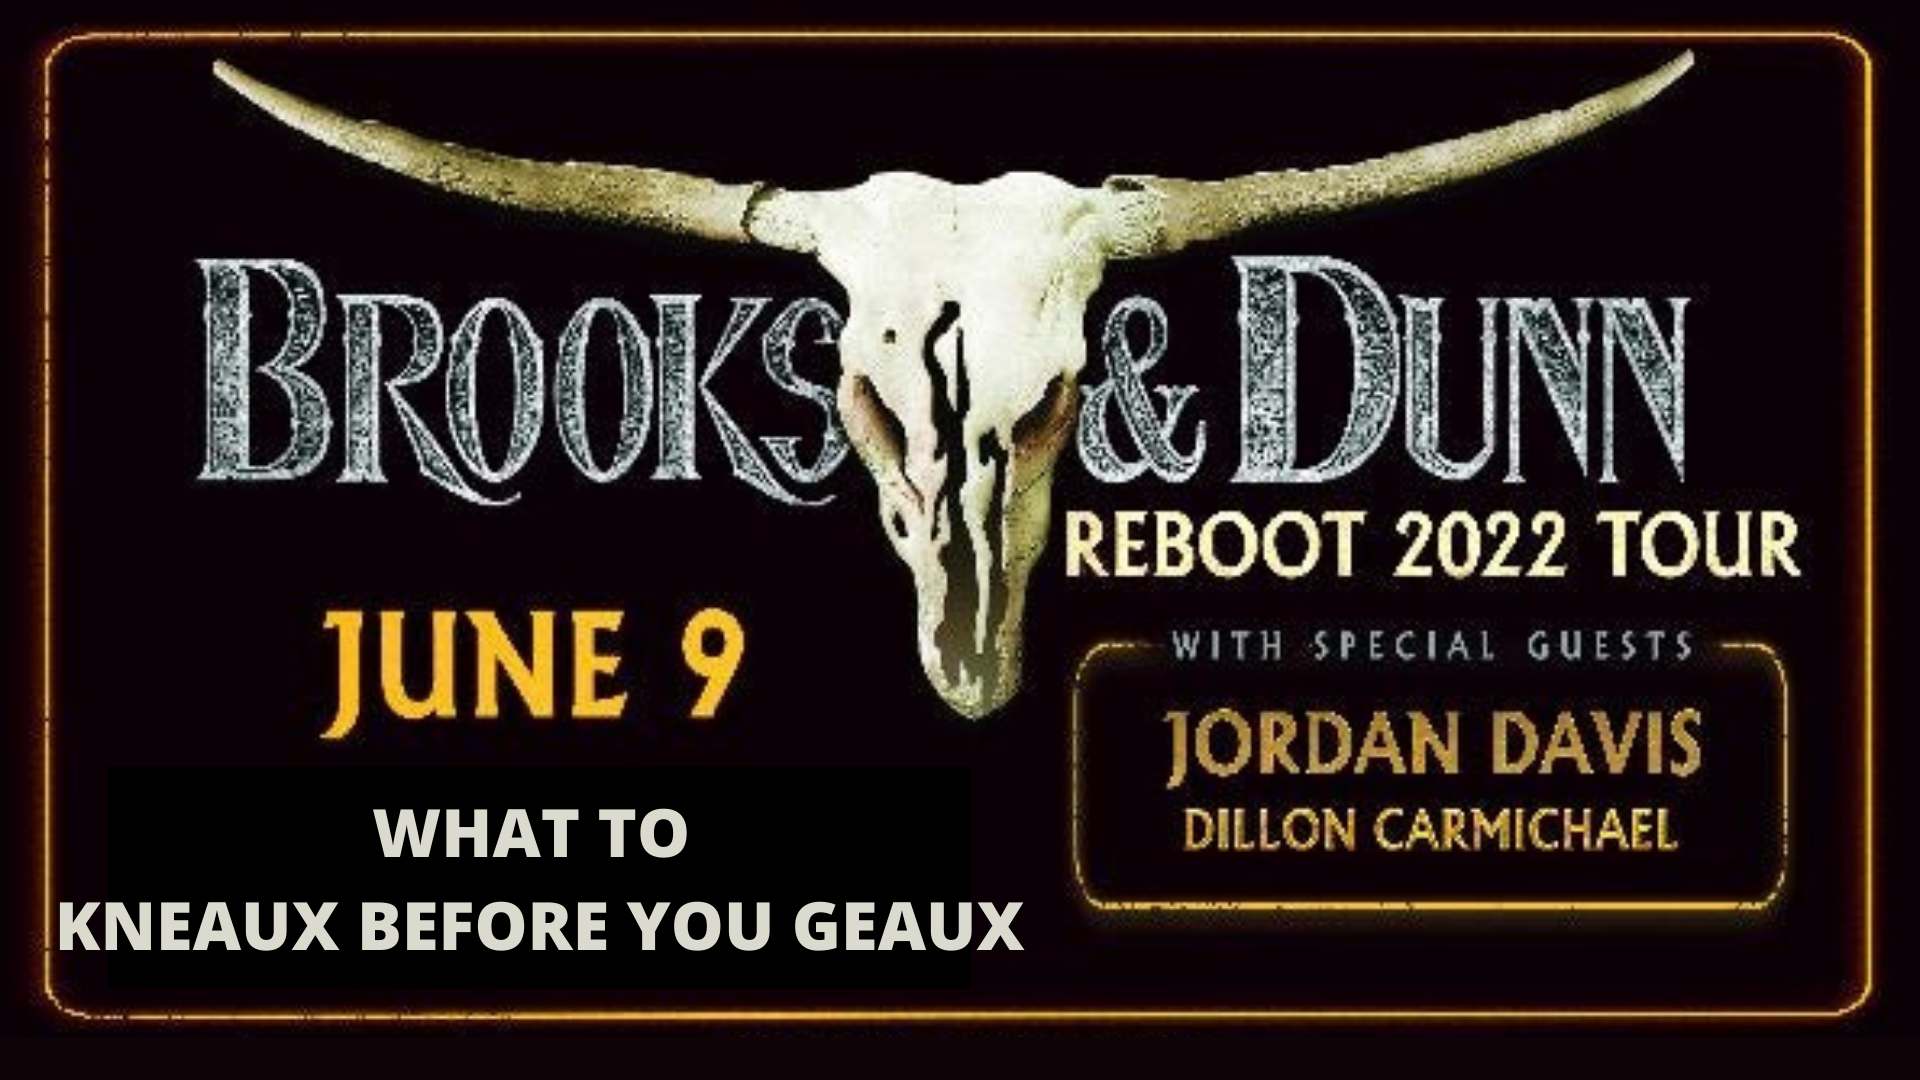 Brooks & Dunn @ the CAJUNDOME This Thursday | Know Before You Go